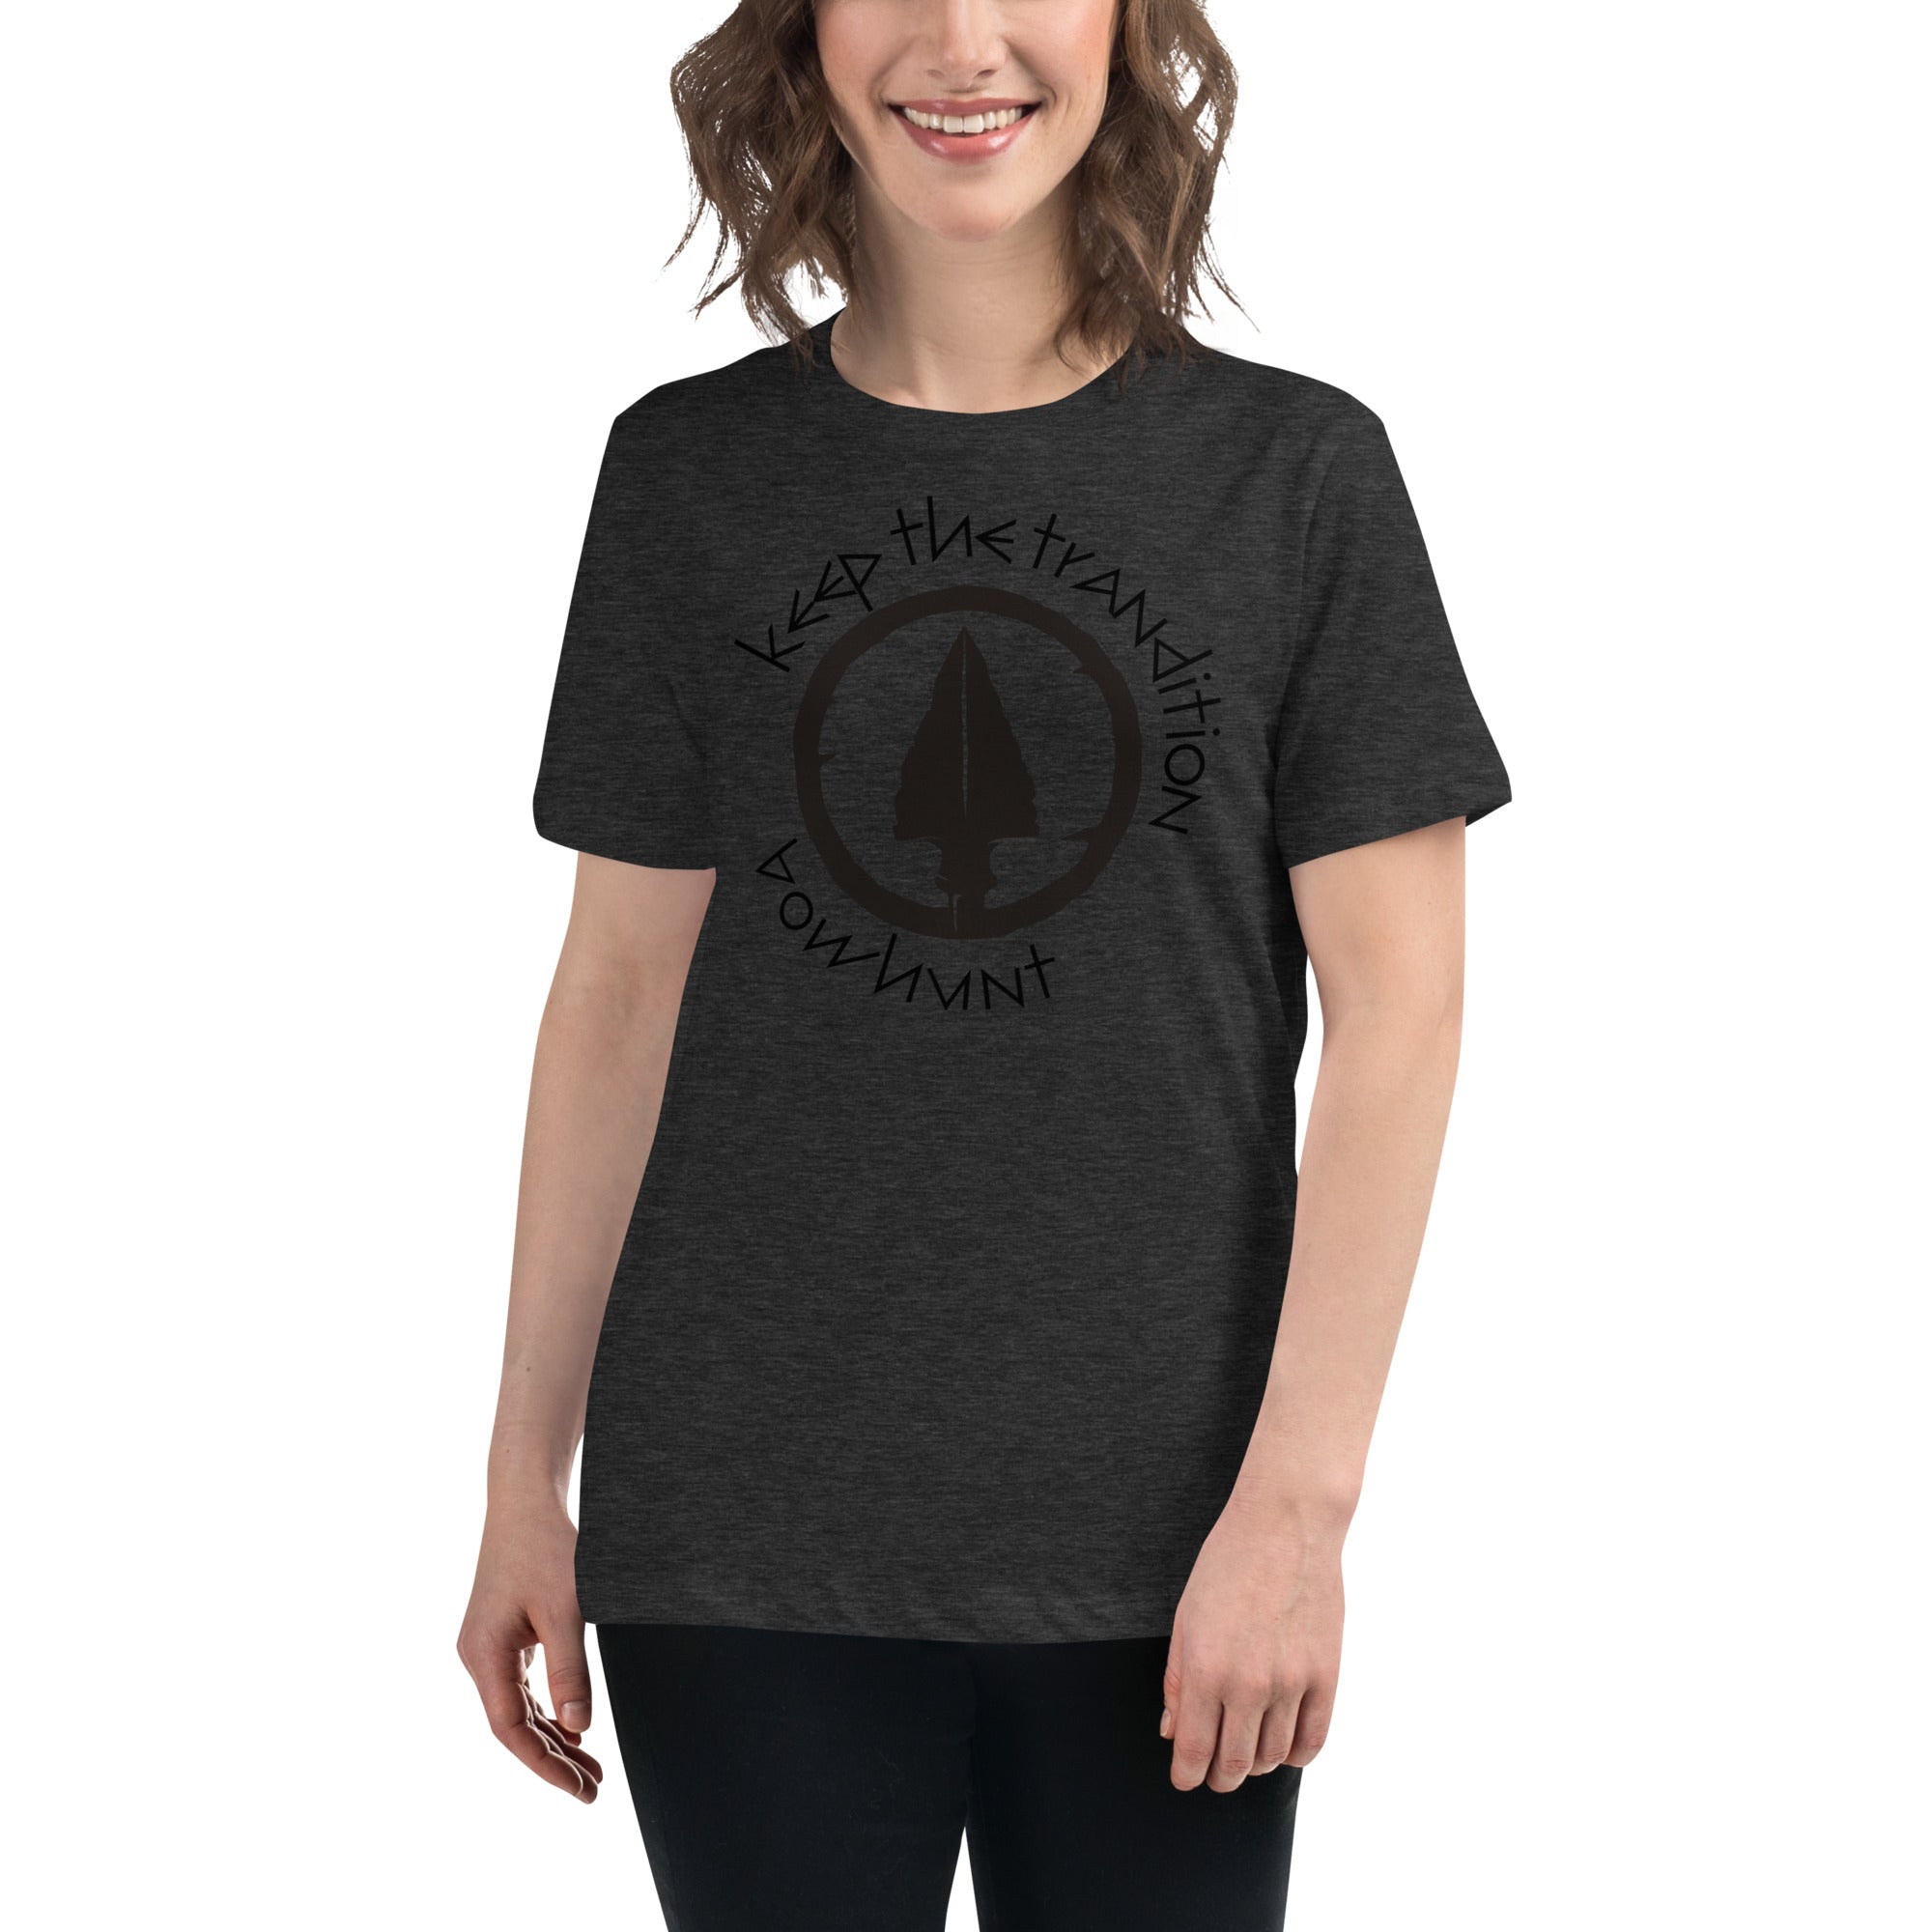 Keep The Tradition Women's Premium T-Shirt - Bow Hunt